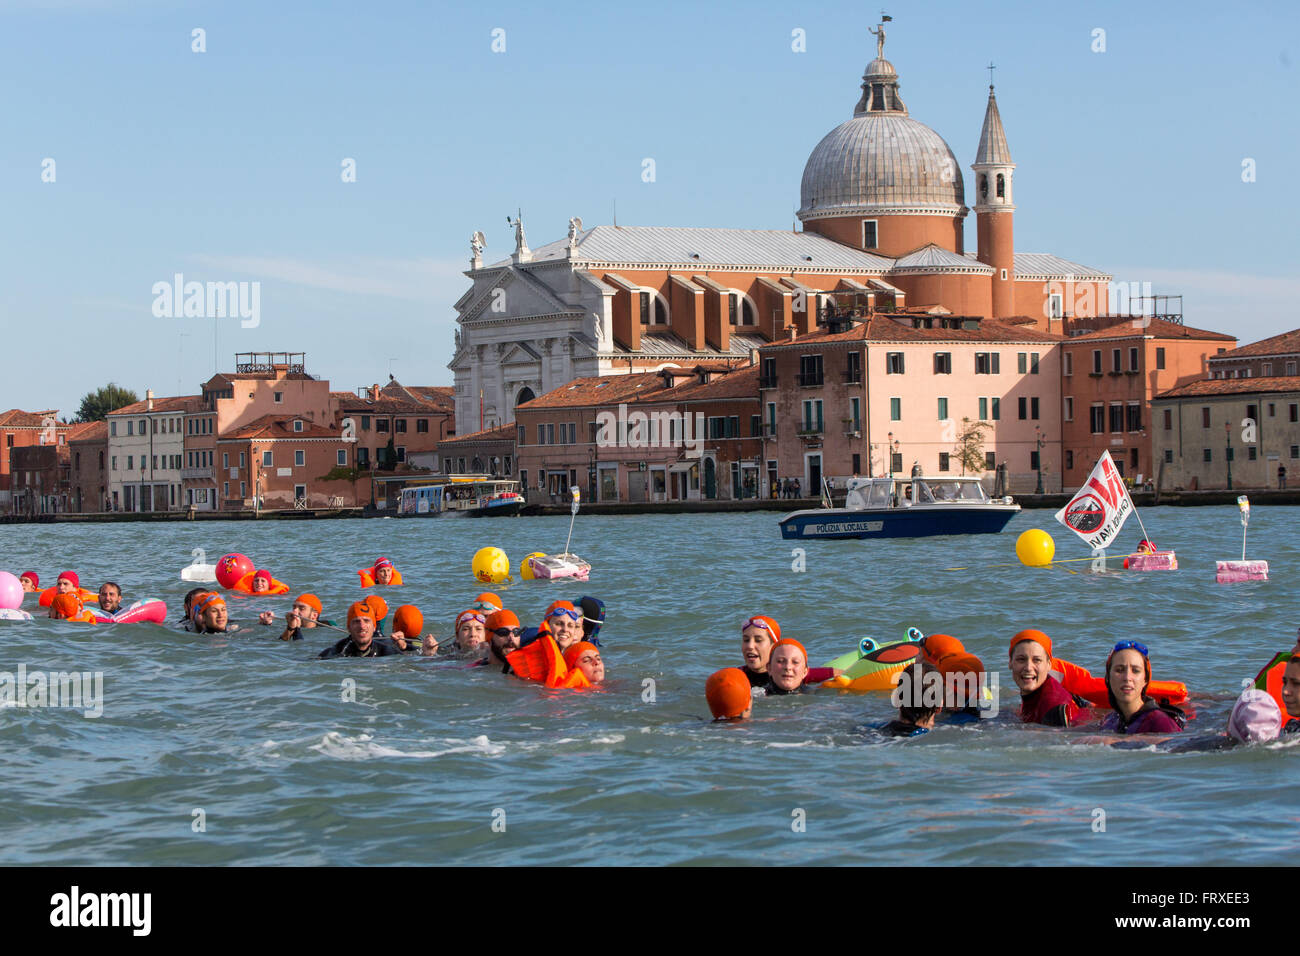 Cruise ship protest, demonstrators with boats and neopren wet suits protesting against the increasing numbers of cruise ships allowed into Venice, Venetien, Italy Stock Photo